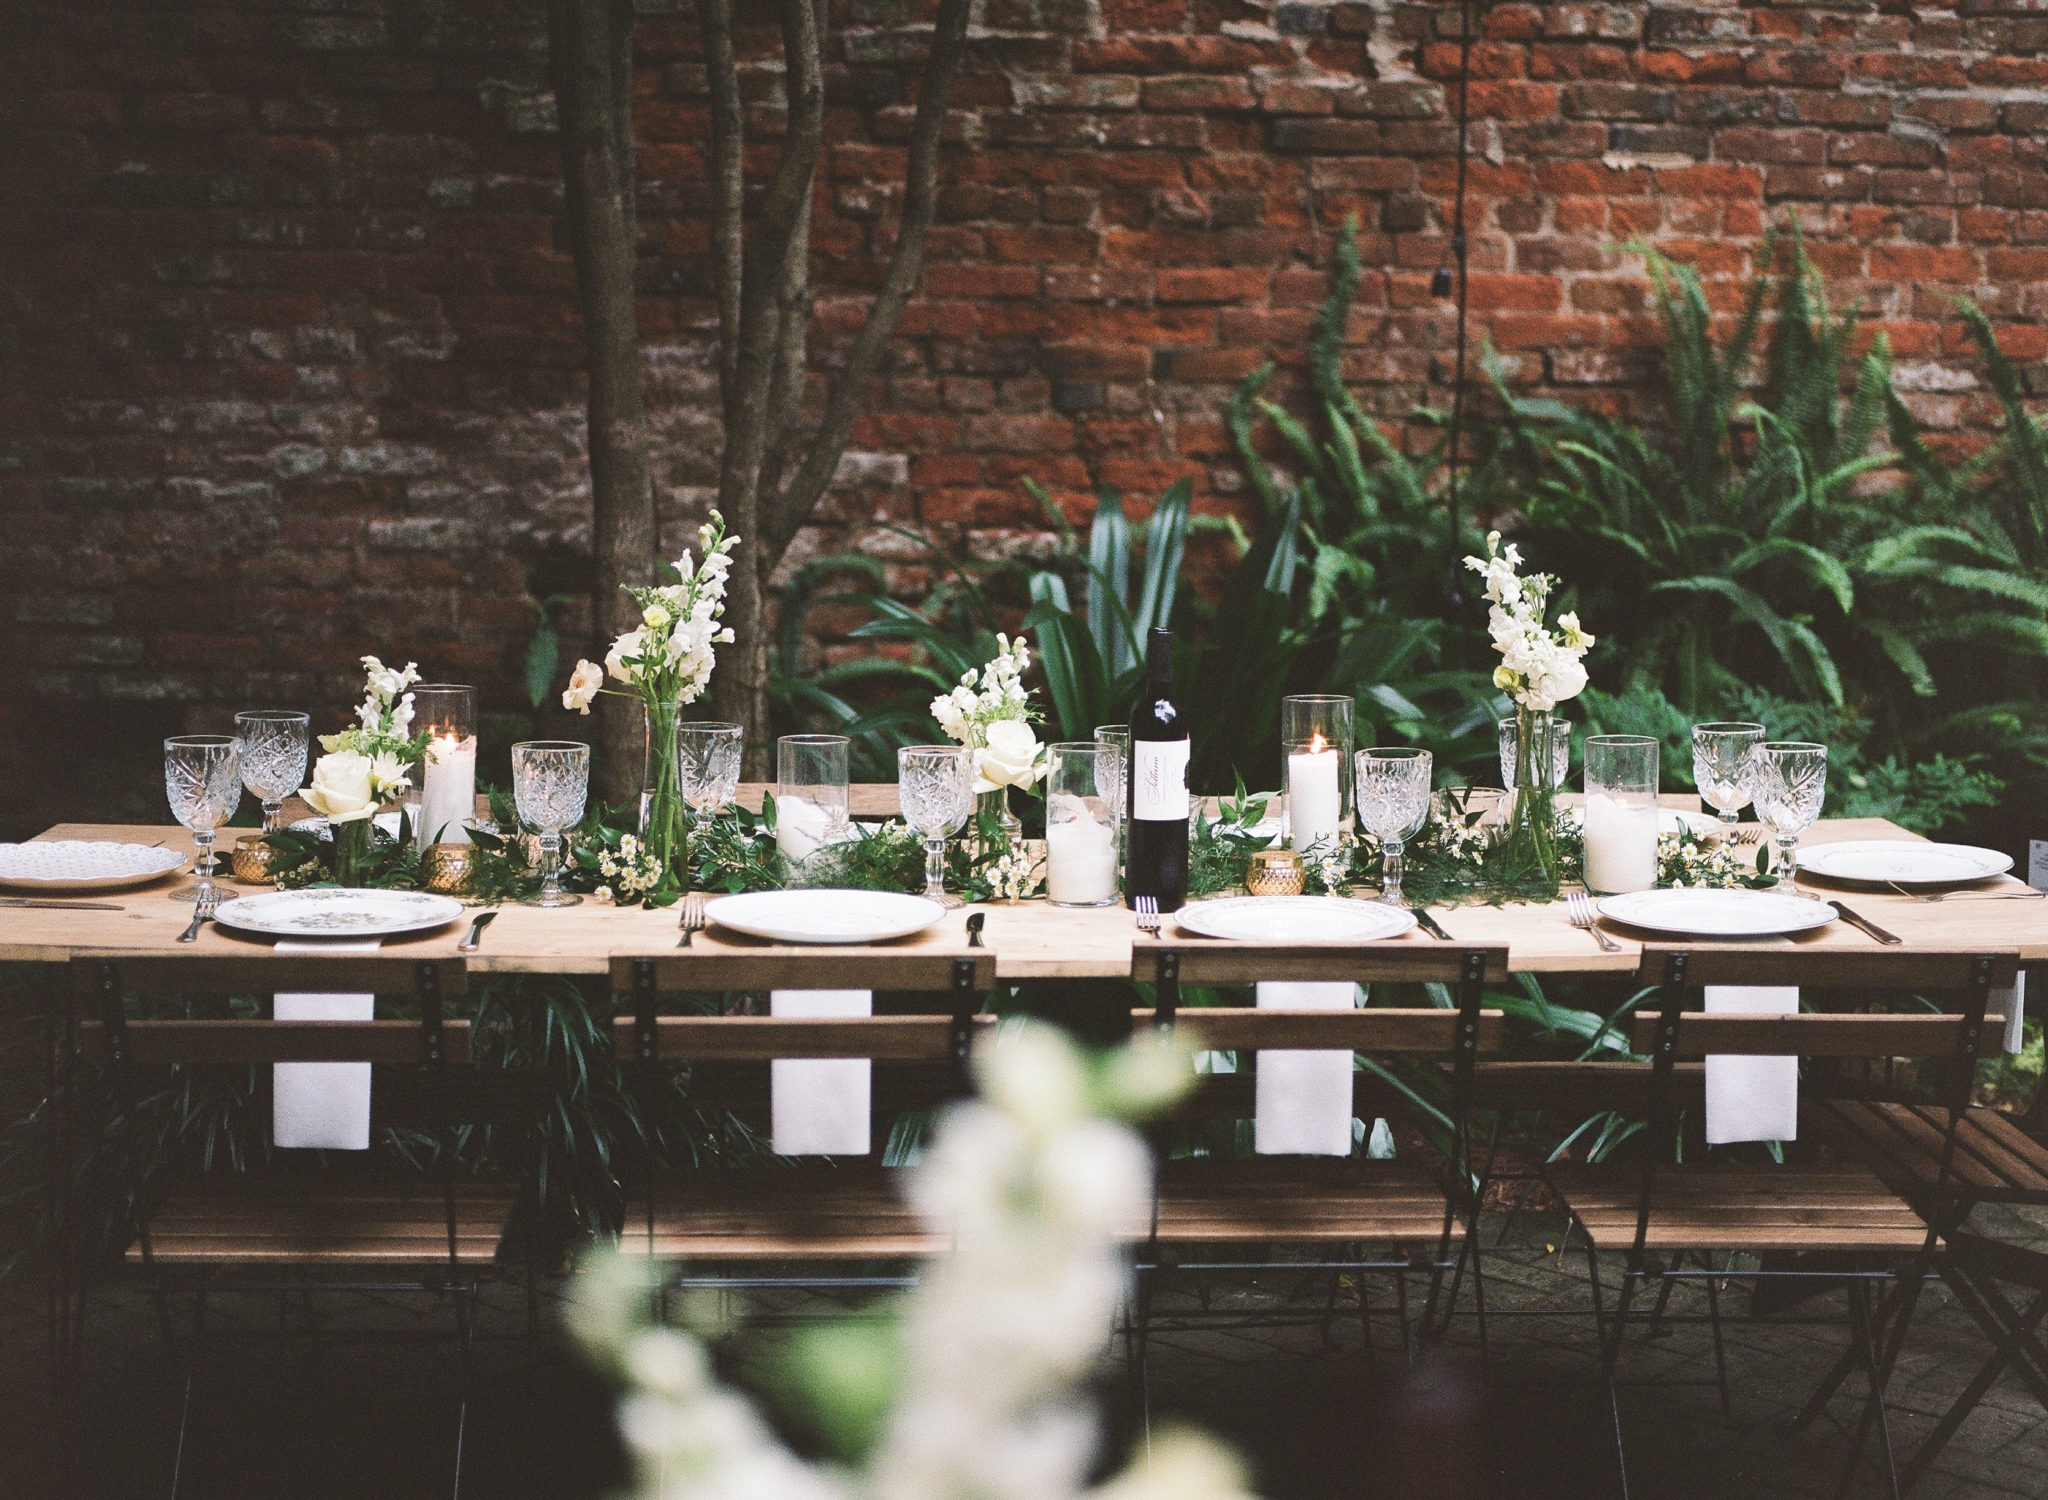 An outdoor dinner party set with elegant decor including crystal wine glasses and white flowers.